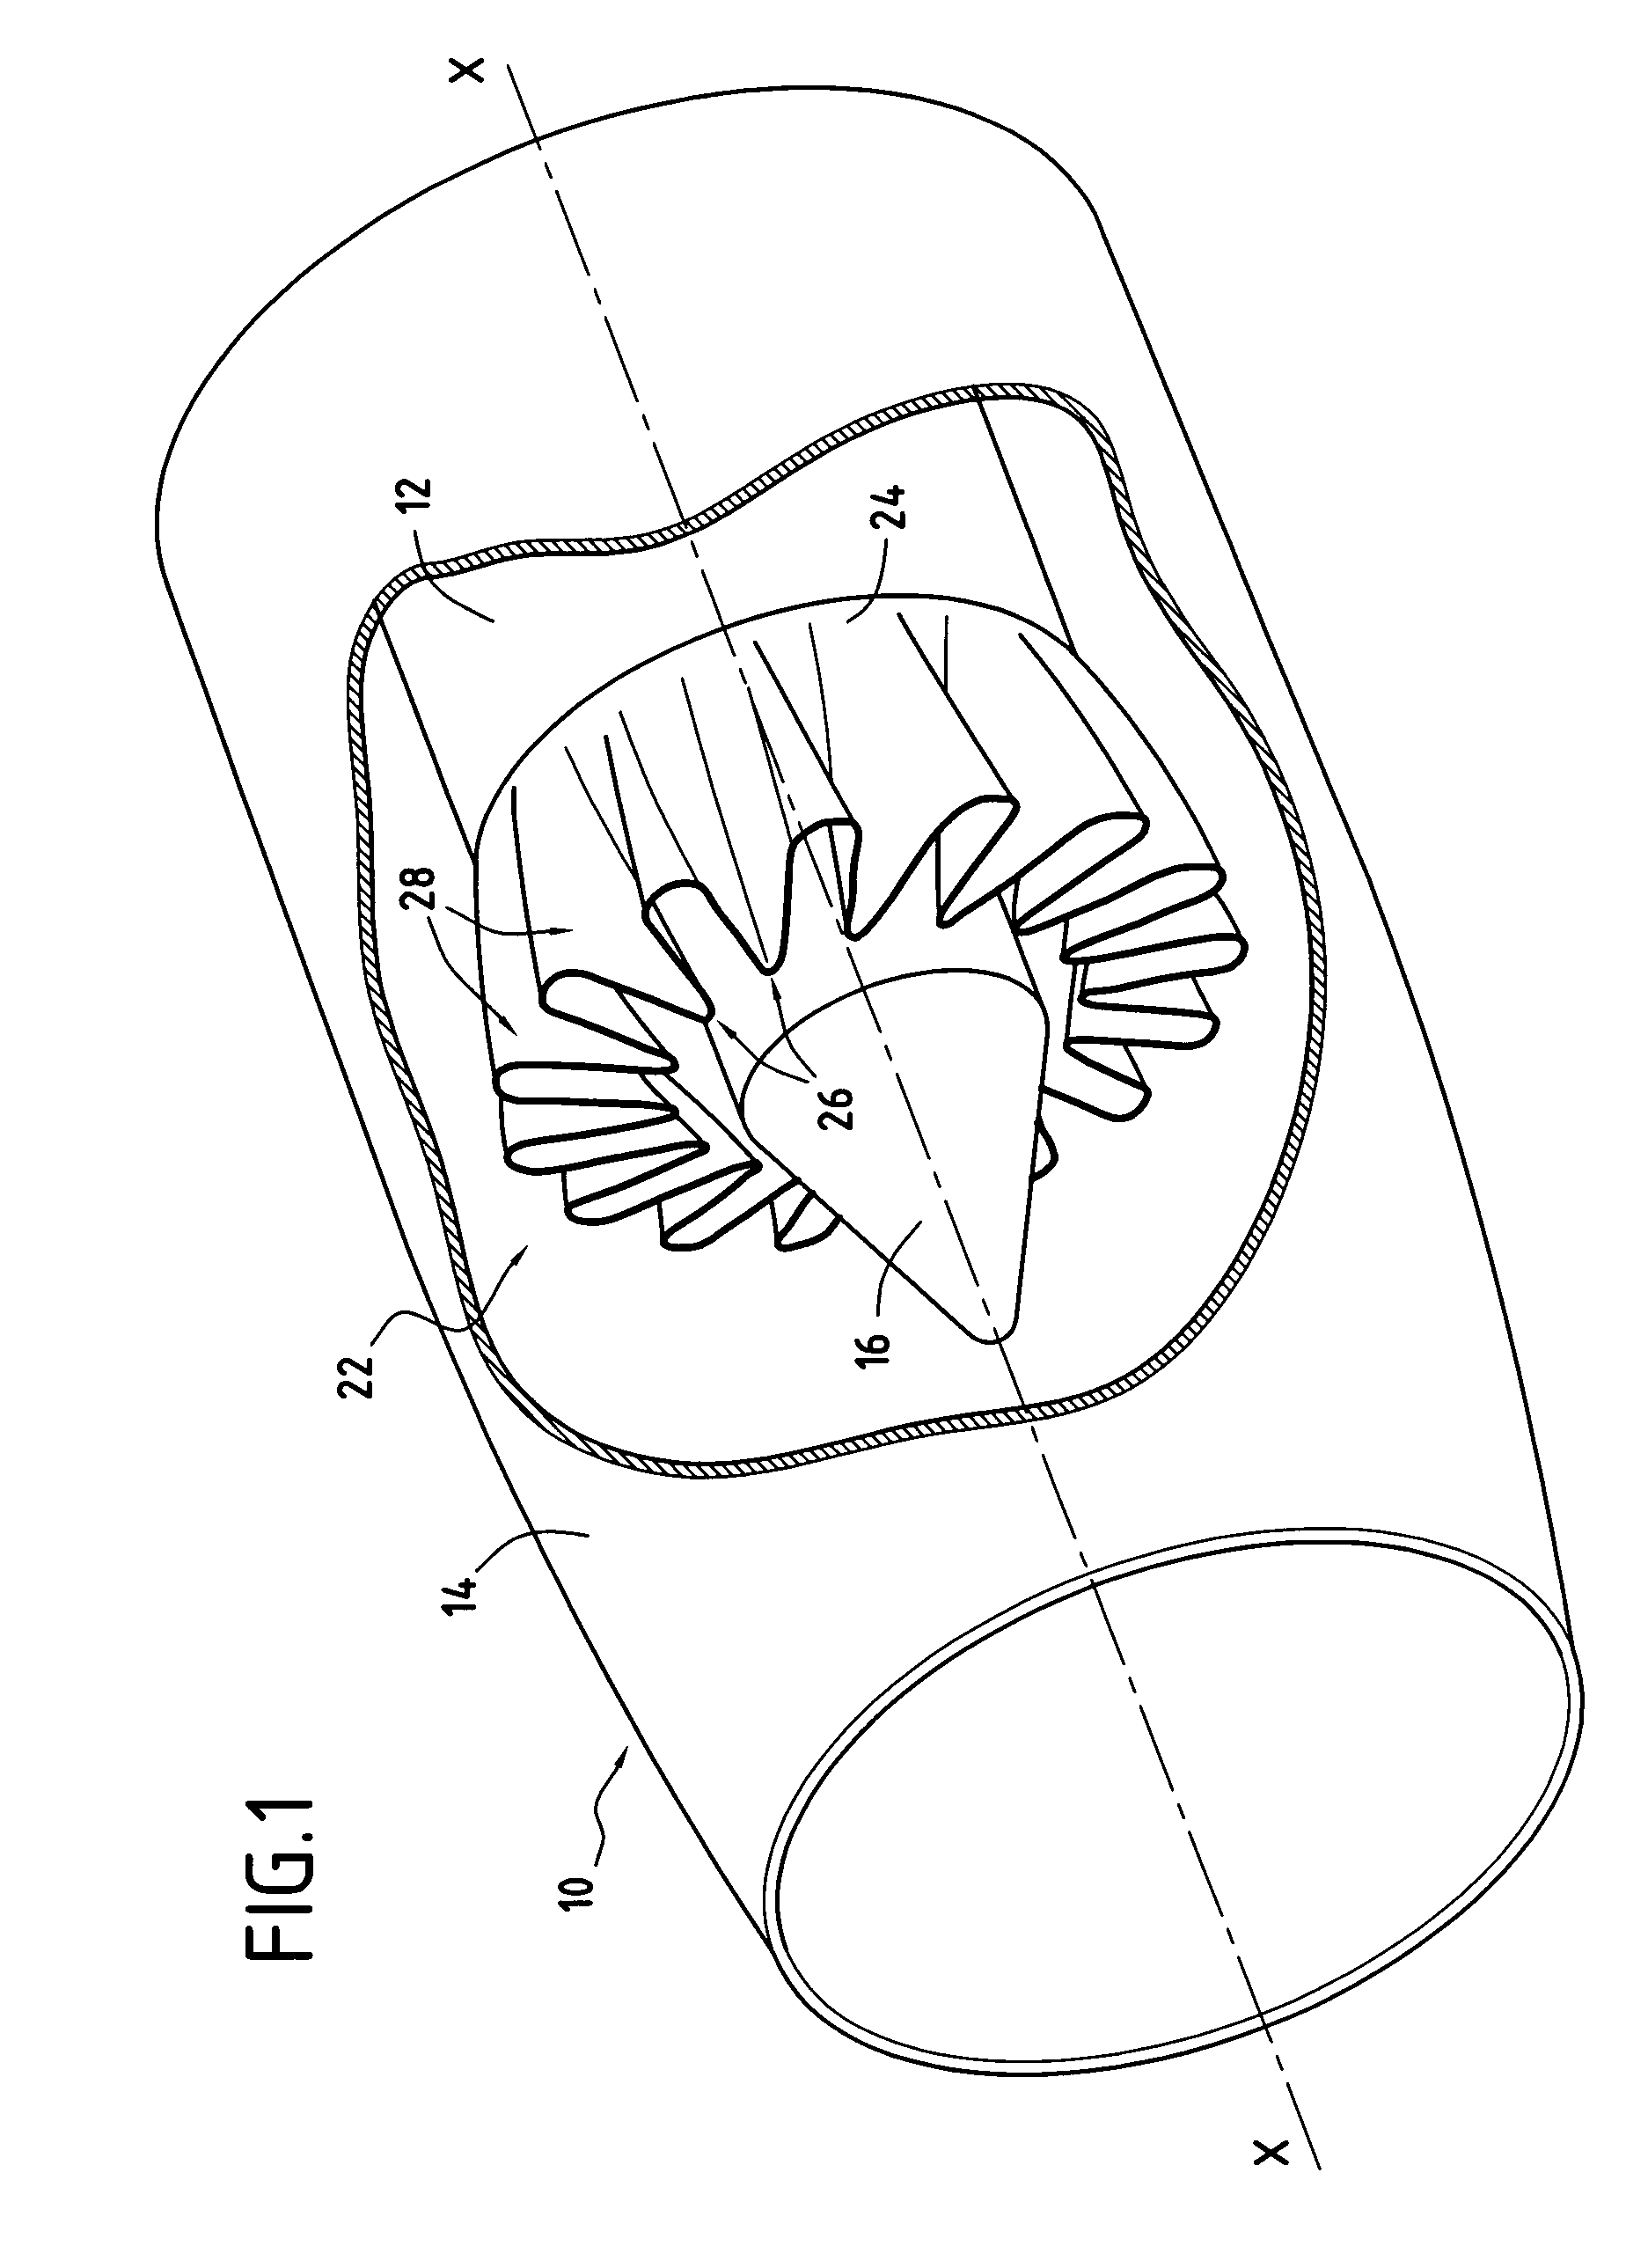 Rotary motion mixer for a converging-stream nozzle of a turbomachine